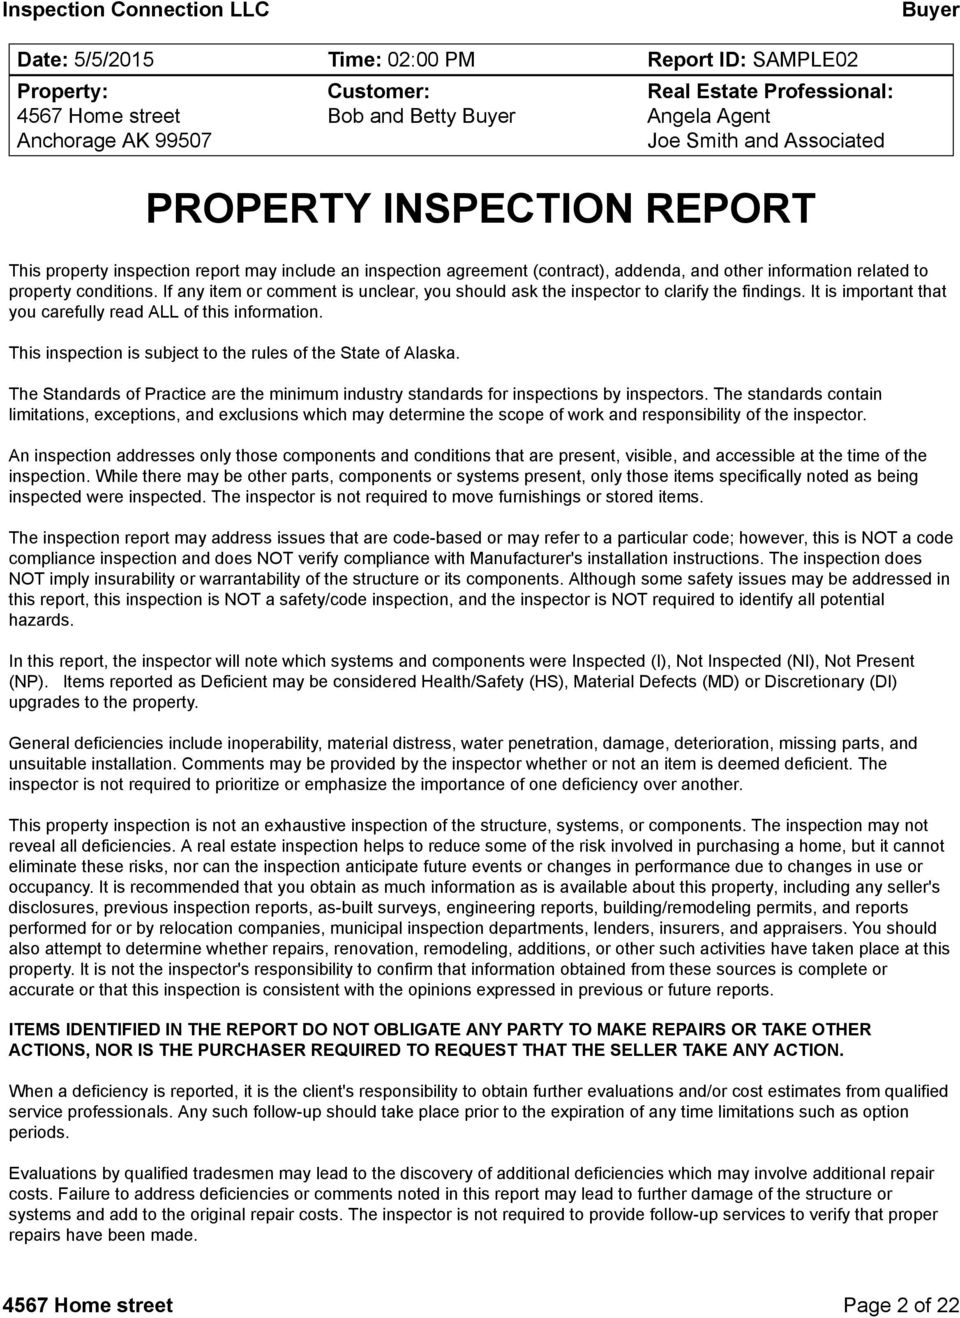 If any item or comment is unclear, you should ask the inspector to clarify the findings. It is important that you carefully read ALL of this information.